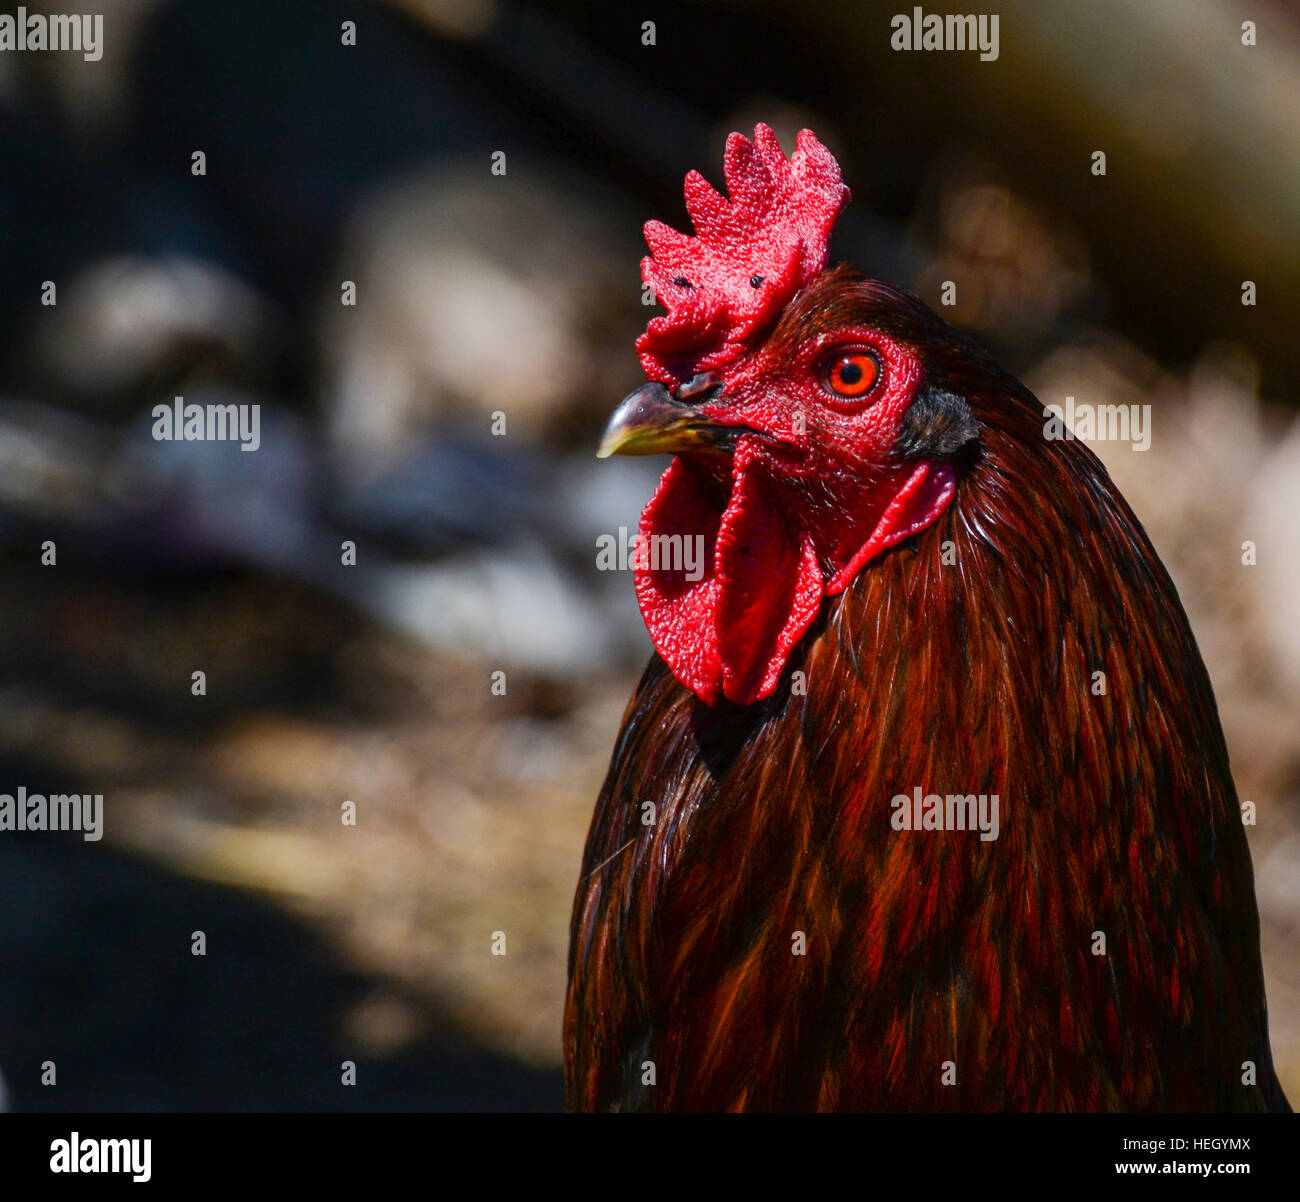 The rooster on the chicken farm. Stock Photo